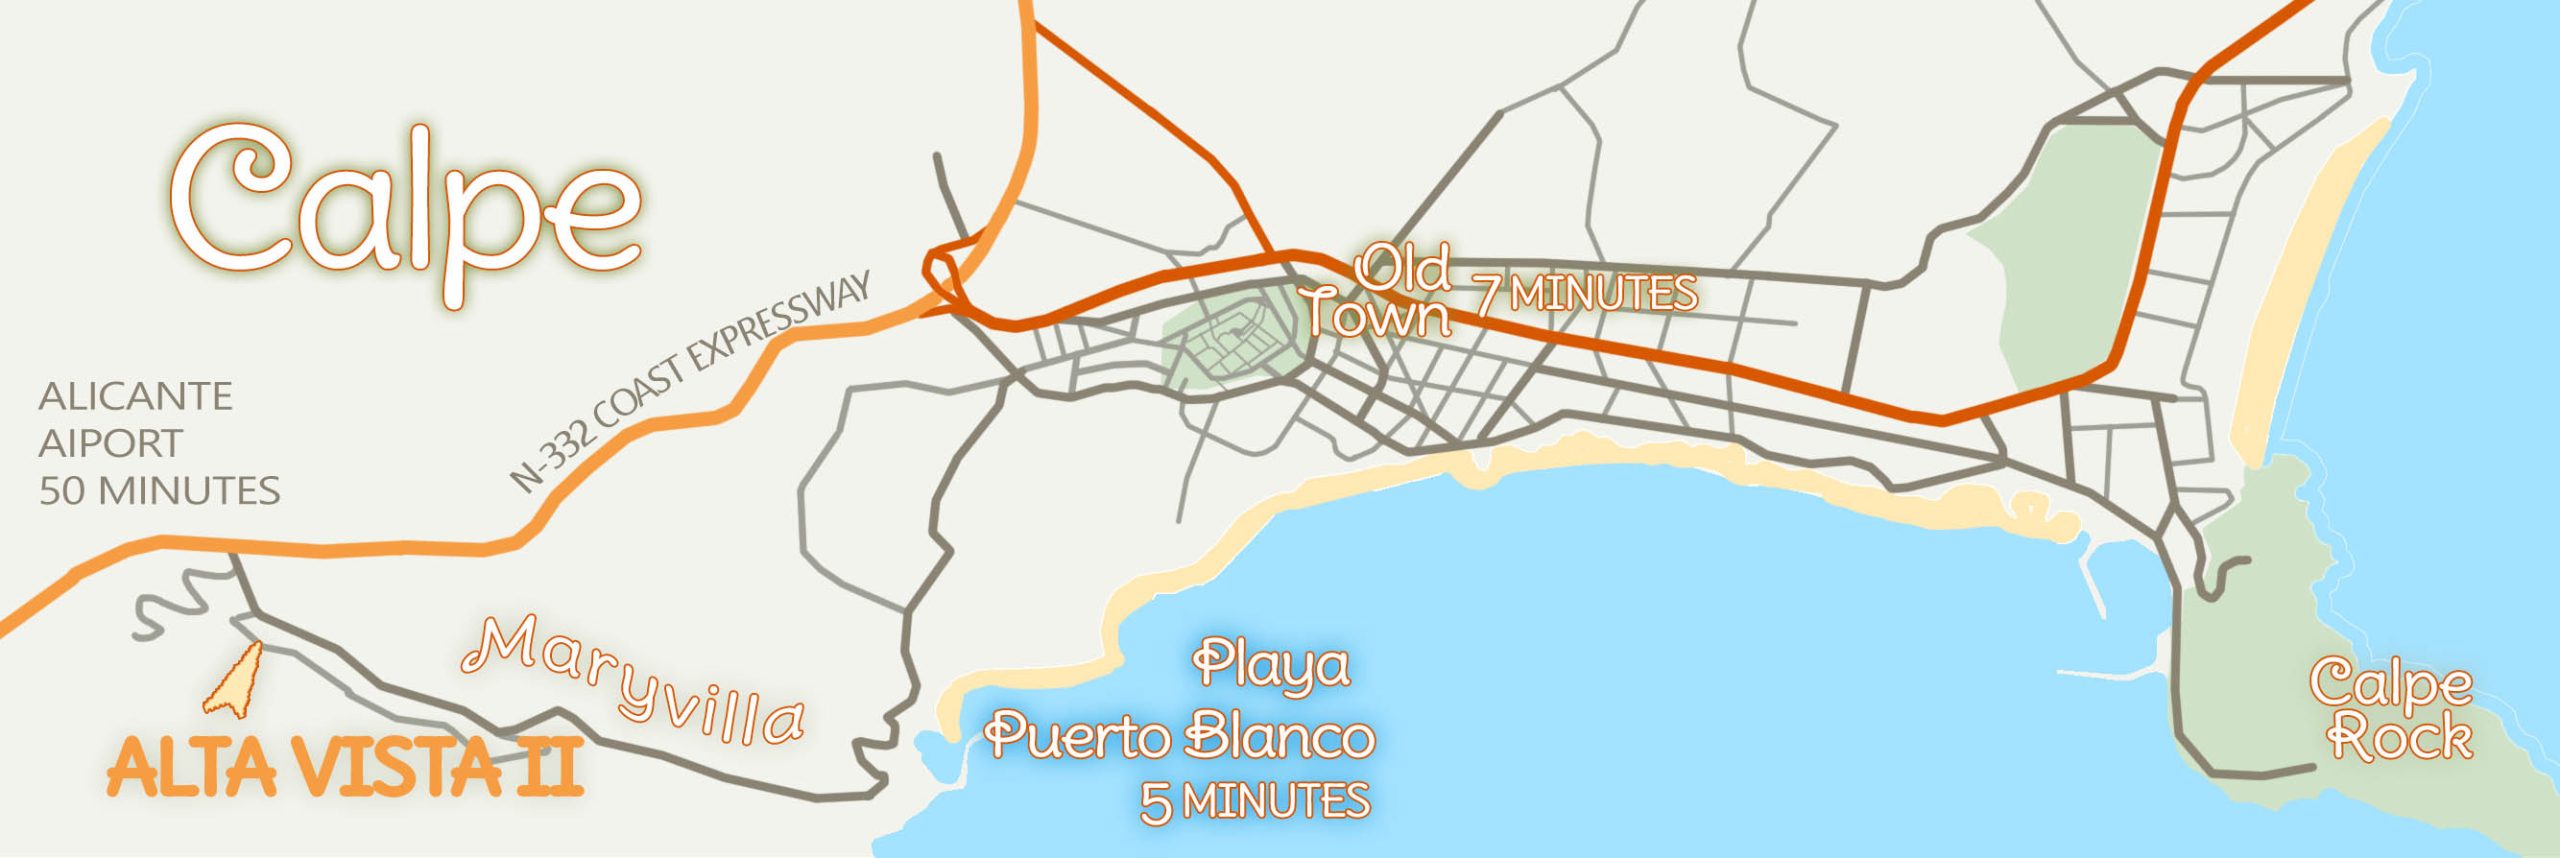 Map of Calpe on the Costa Blanca in Valencia and Alicante Spain!